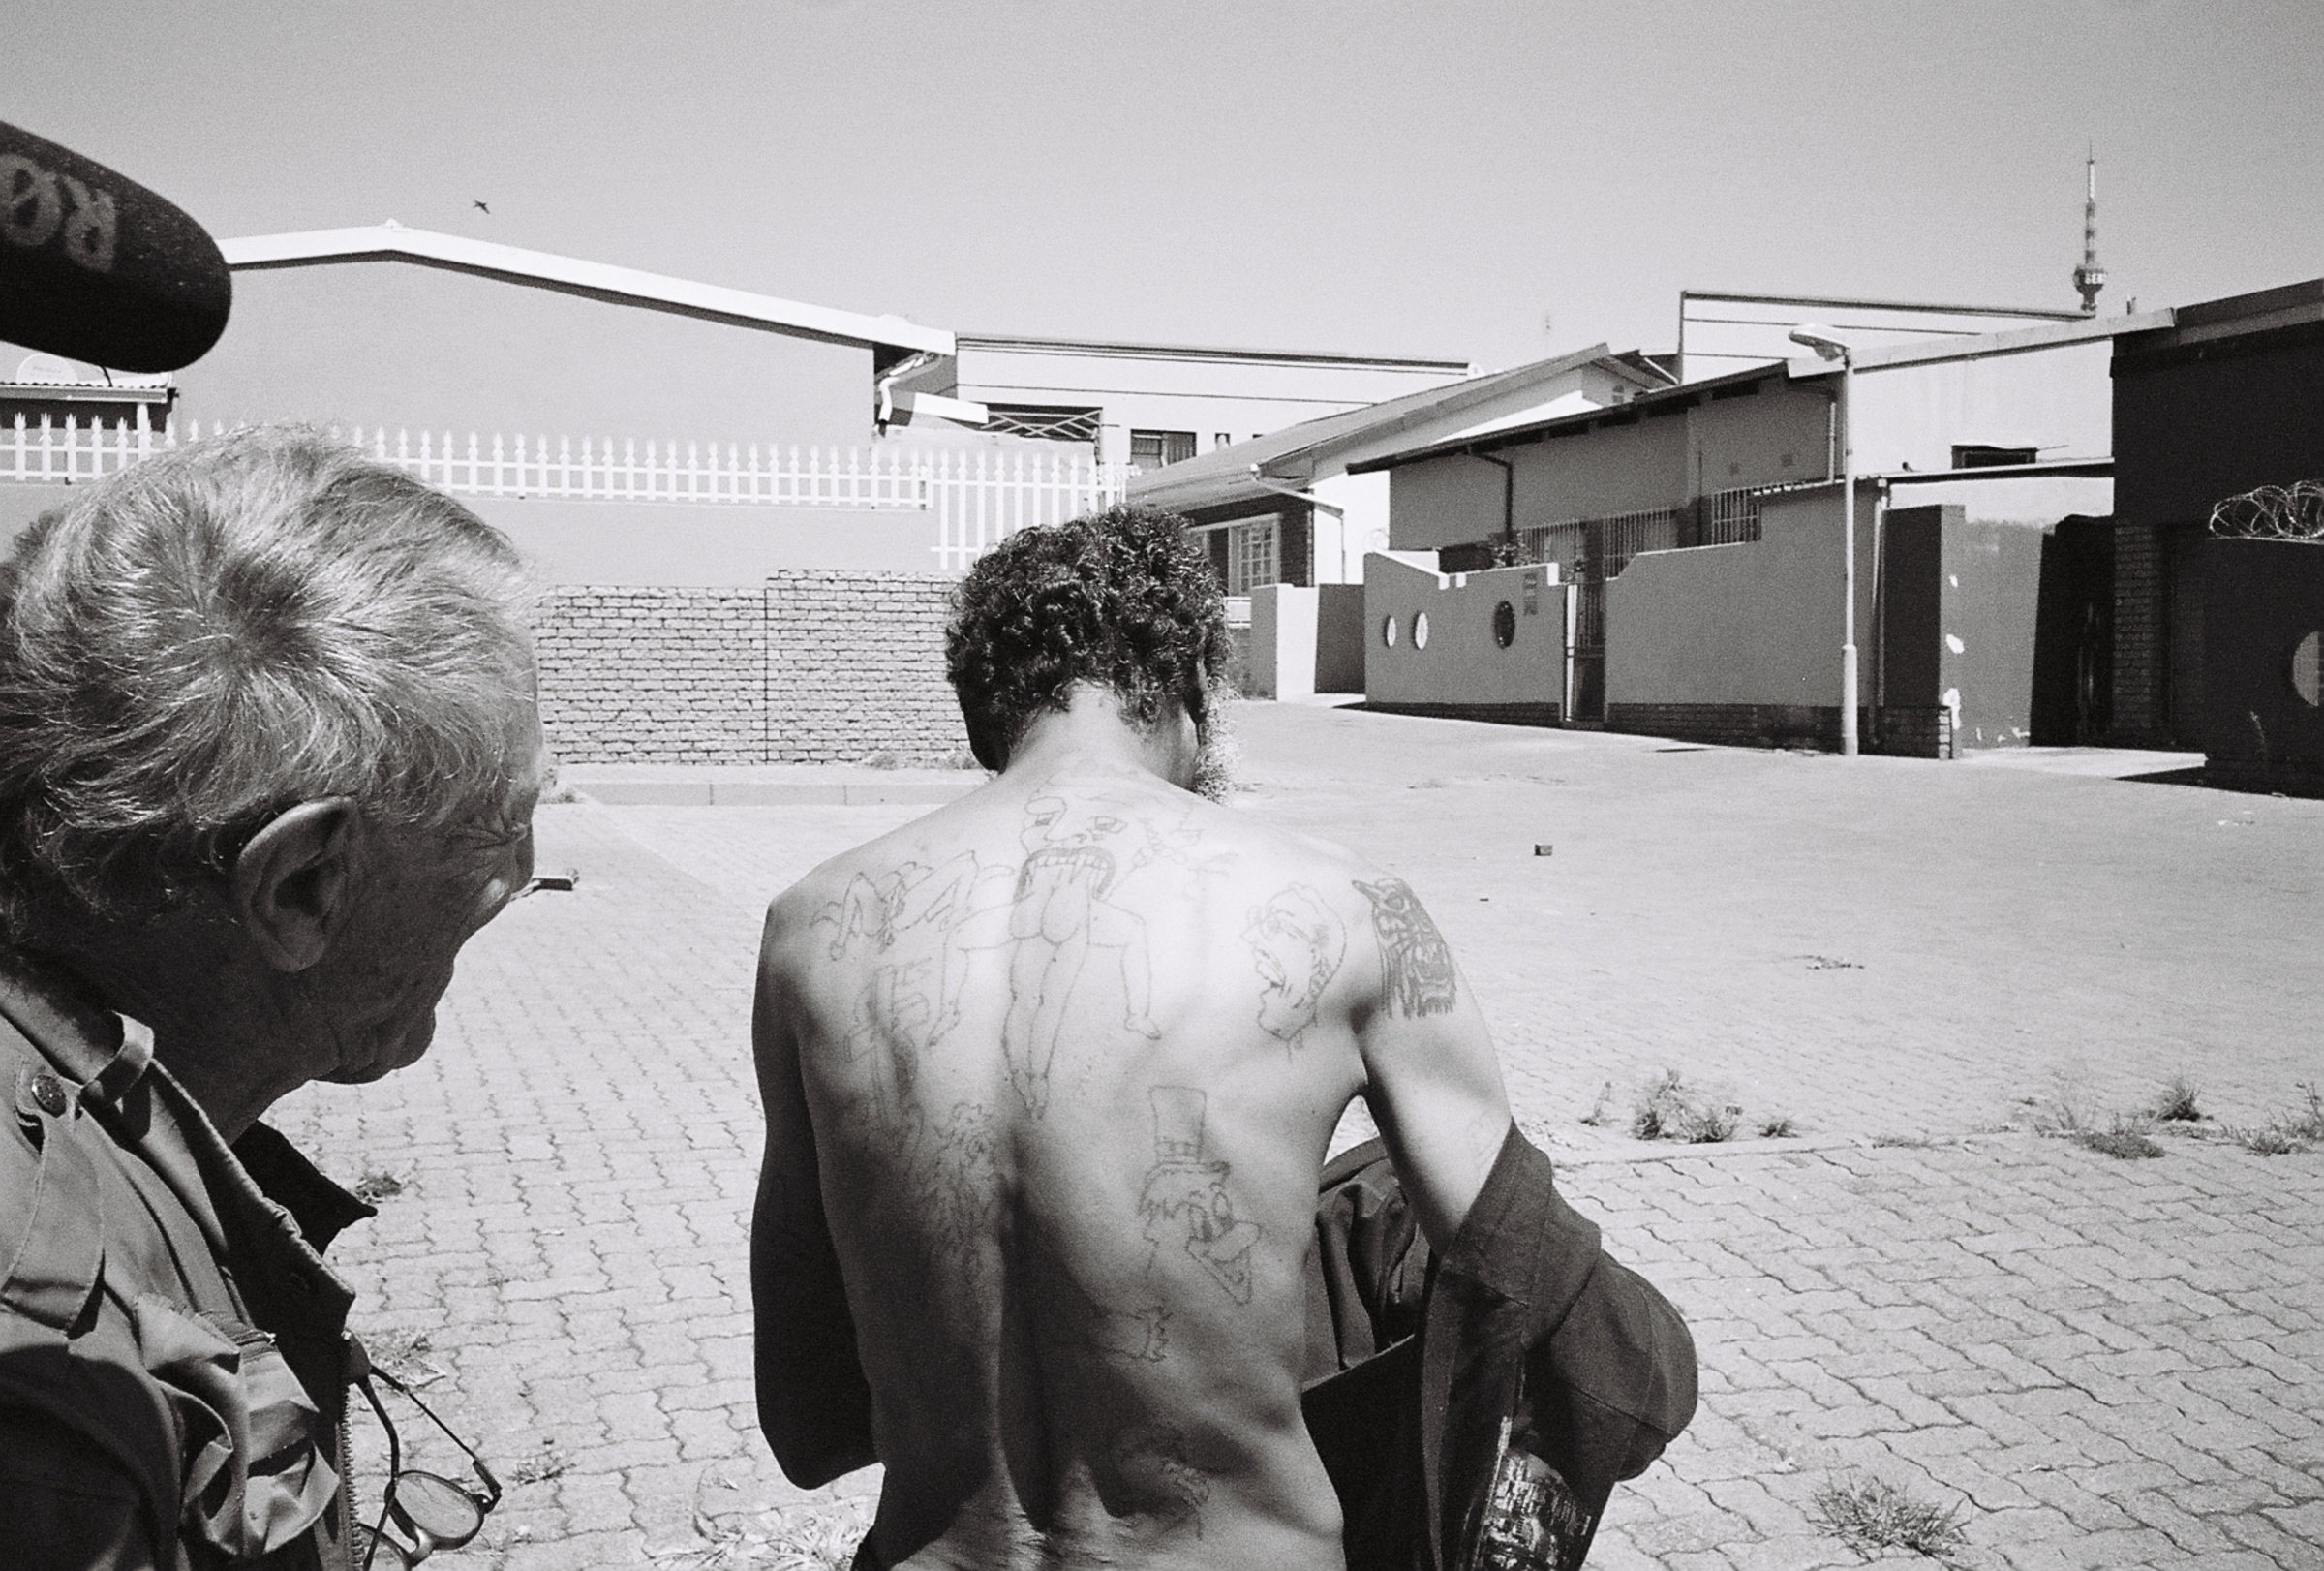 A monochrome process photograph taken in Fietas, Johannesburg during the making of the film ‘Goldblatt: A Documentary’ by director Daniel Zimbler. On the left, the side of David Goldblatt’s face. In the middle, a man with his back exposed, covered in tattoos. In the back, various buildings.
